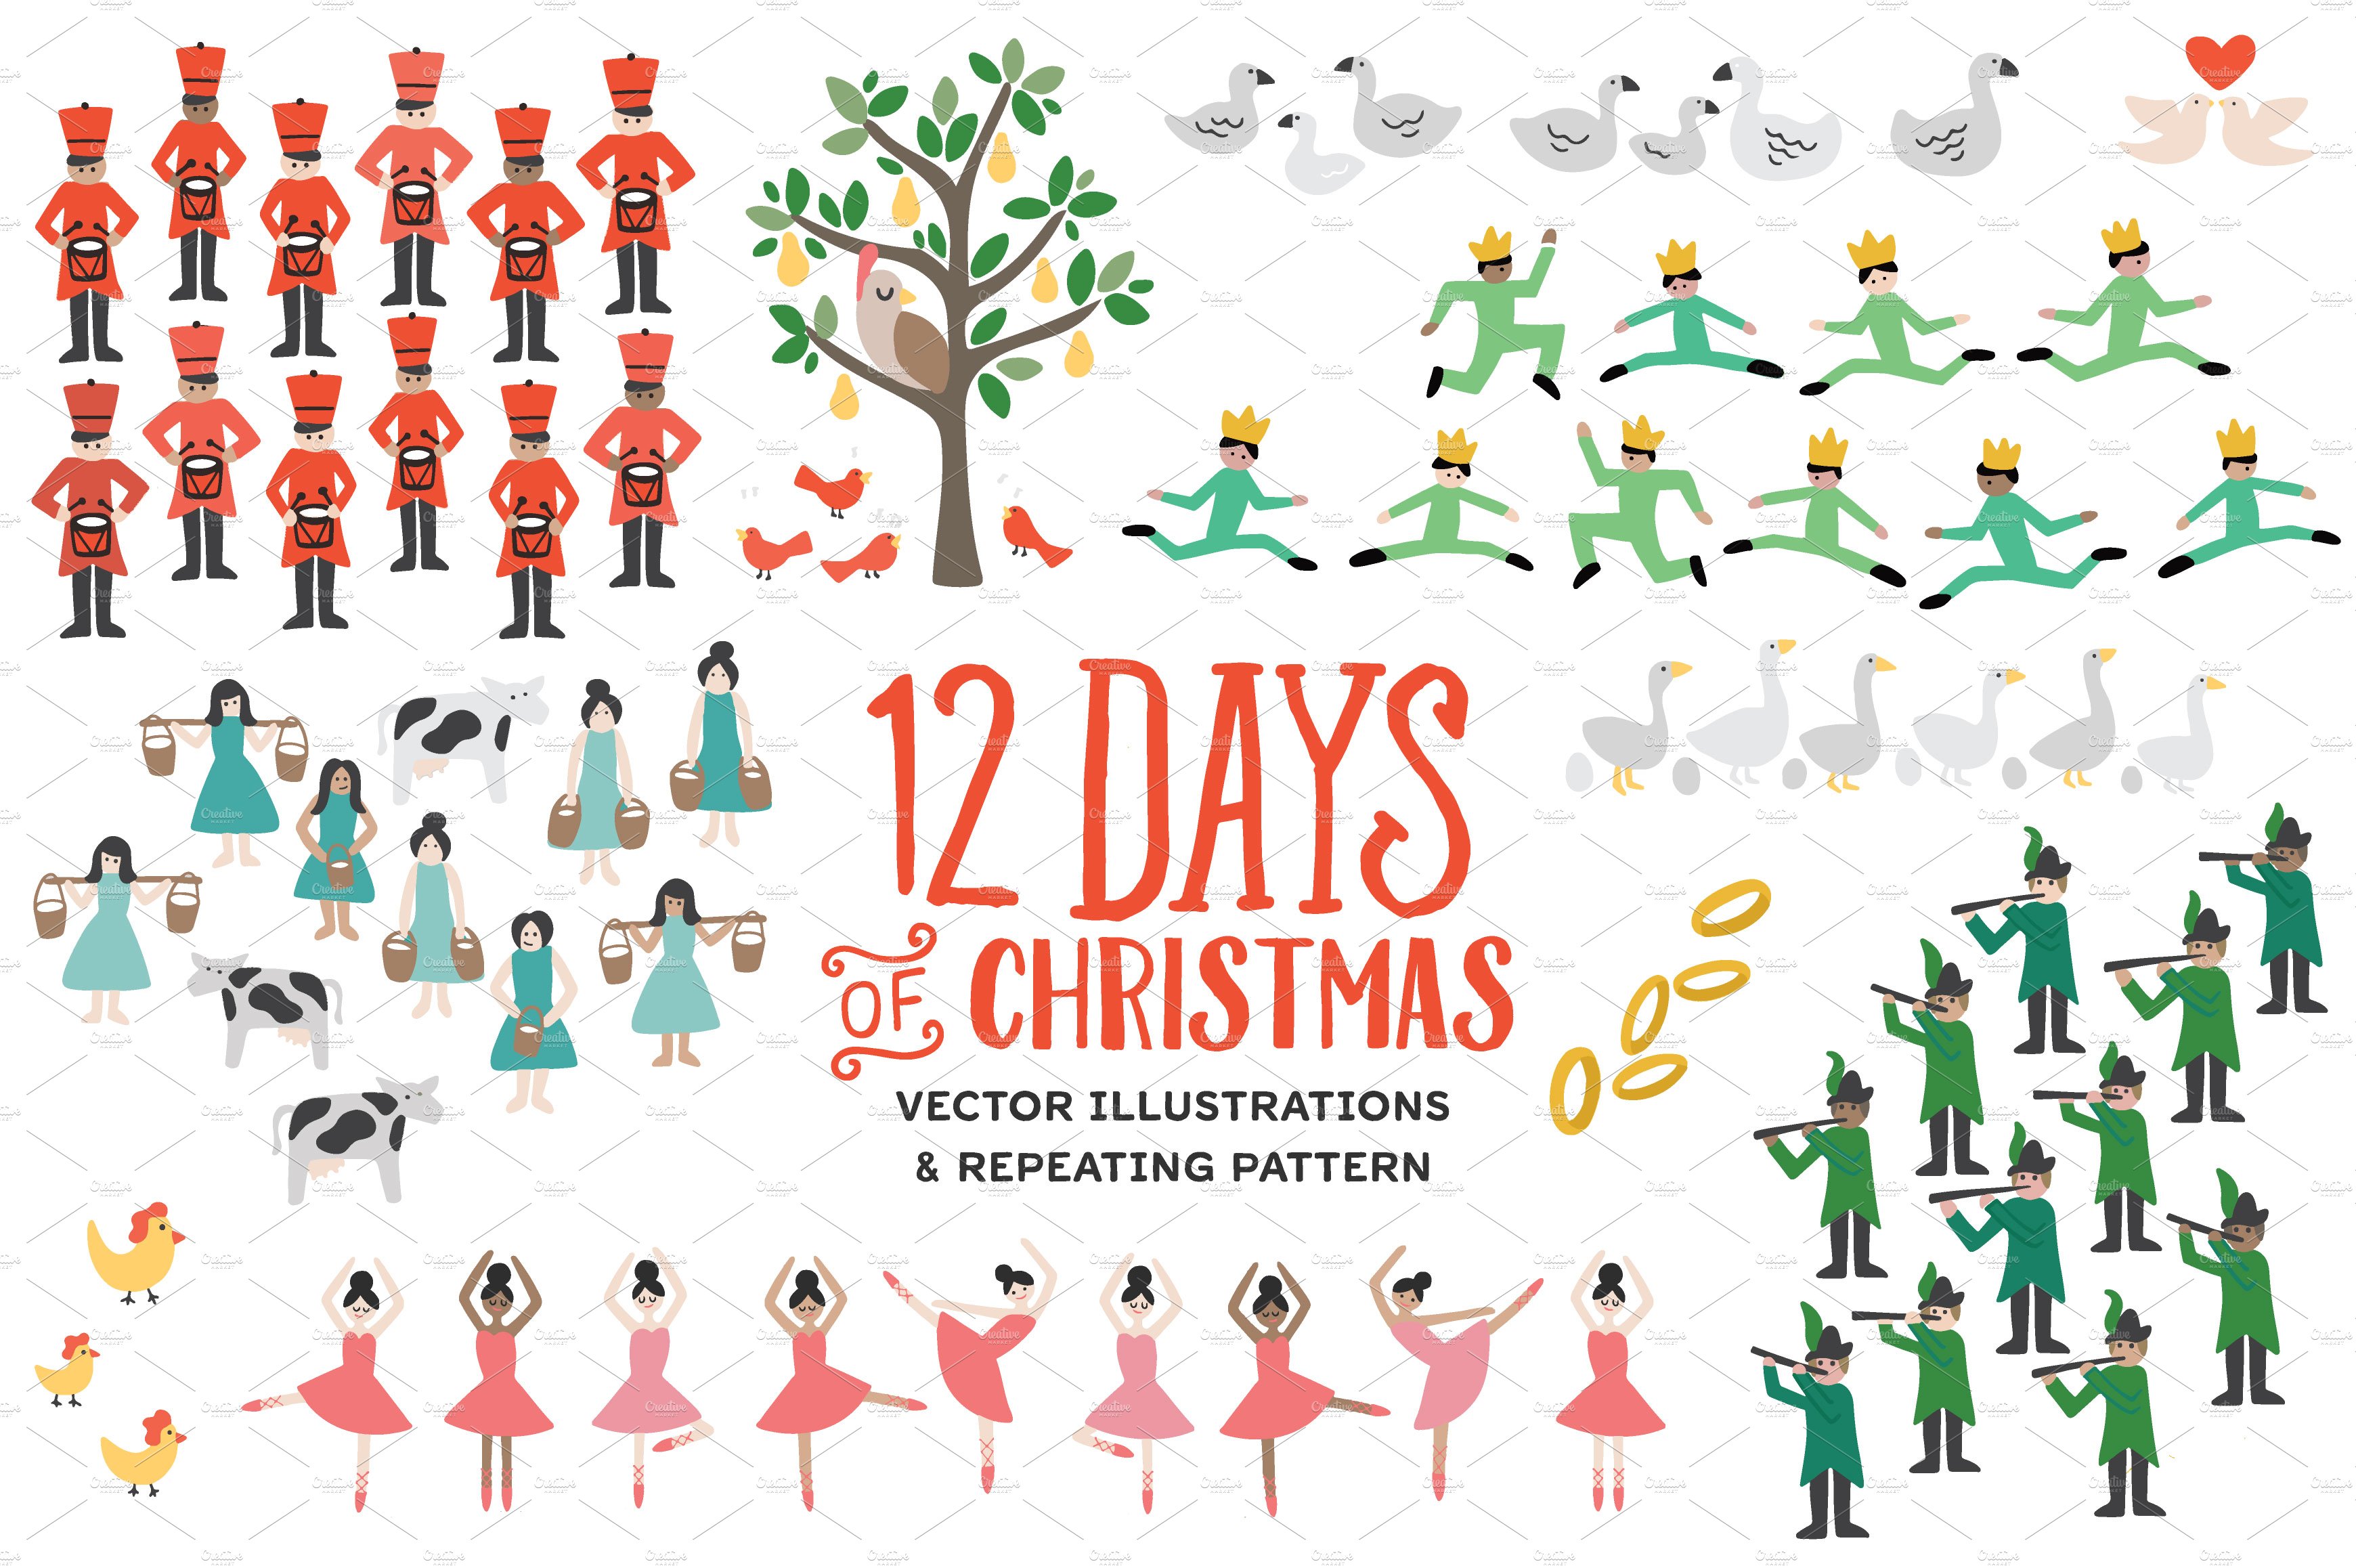 Twelve Days of Christmas cover image.